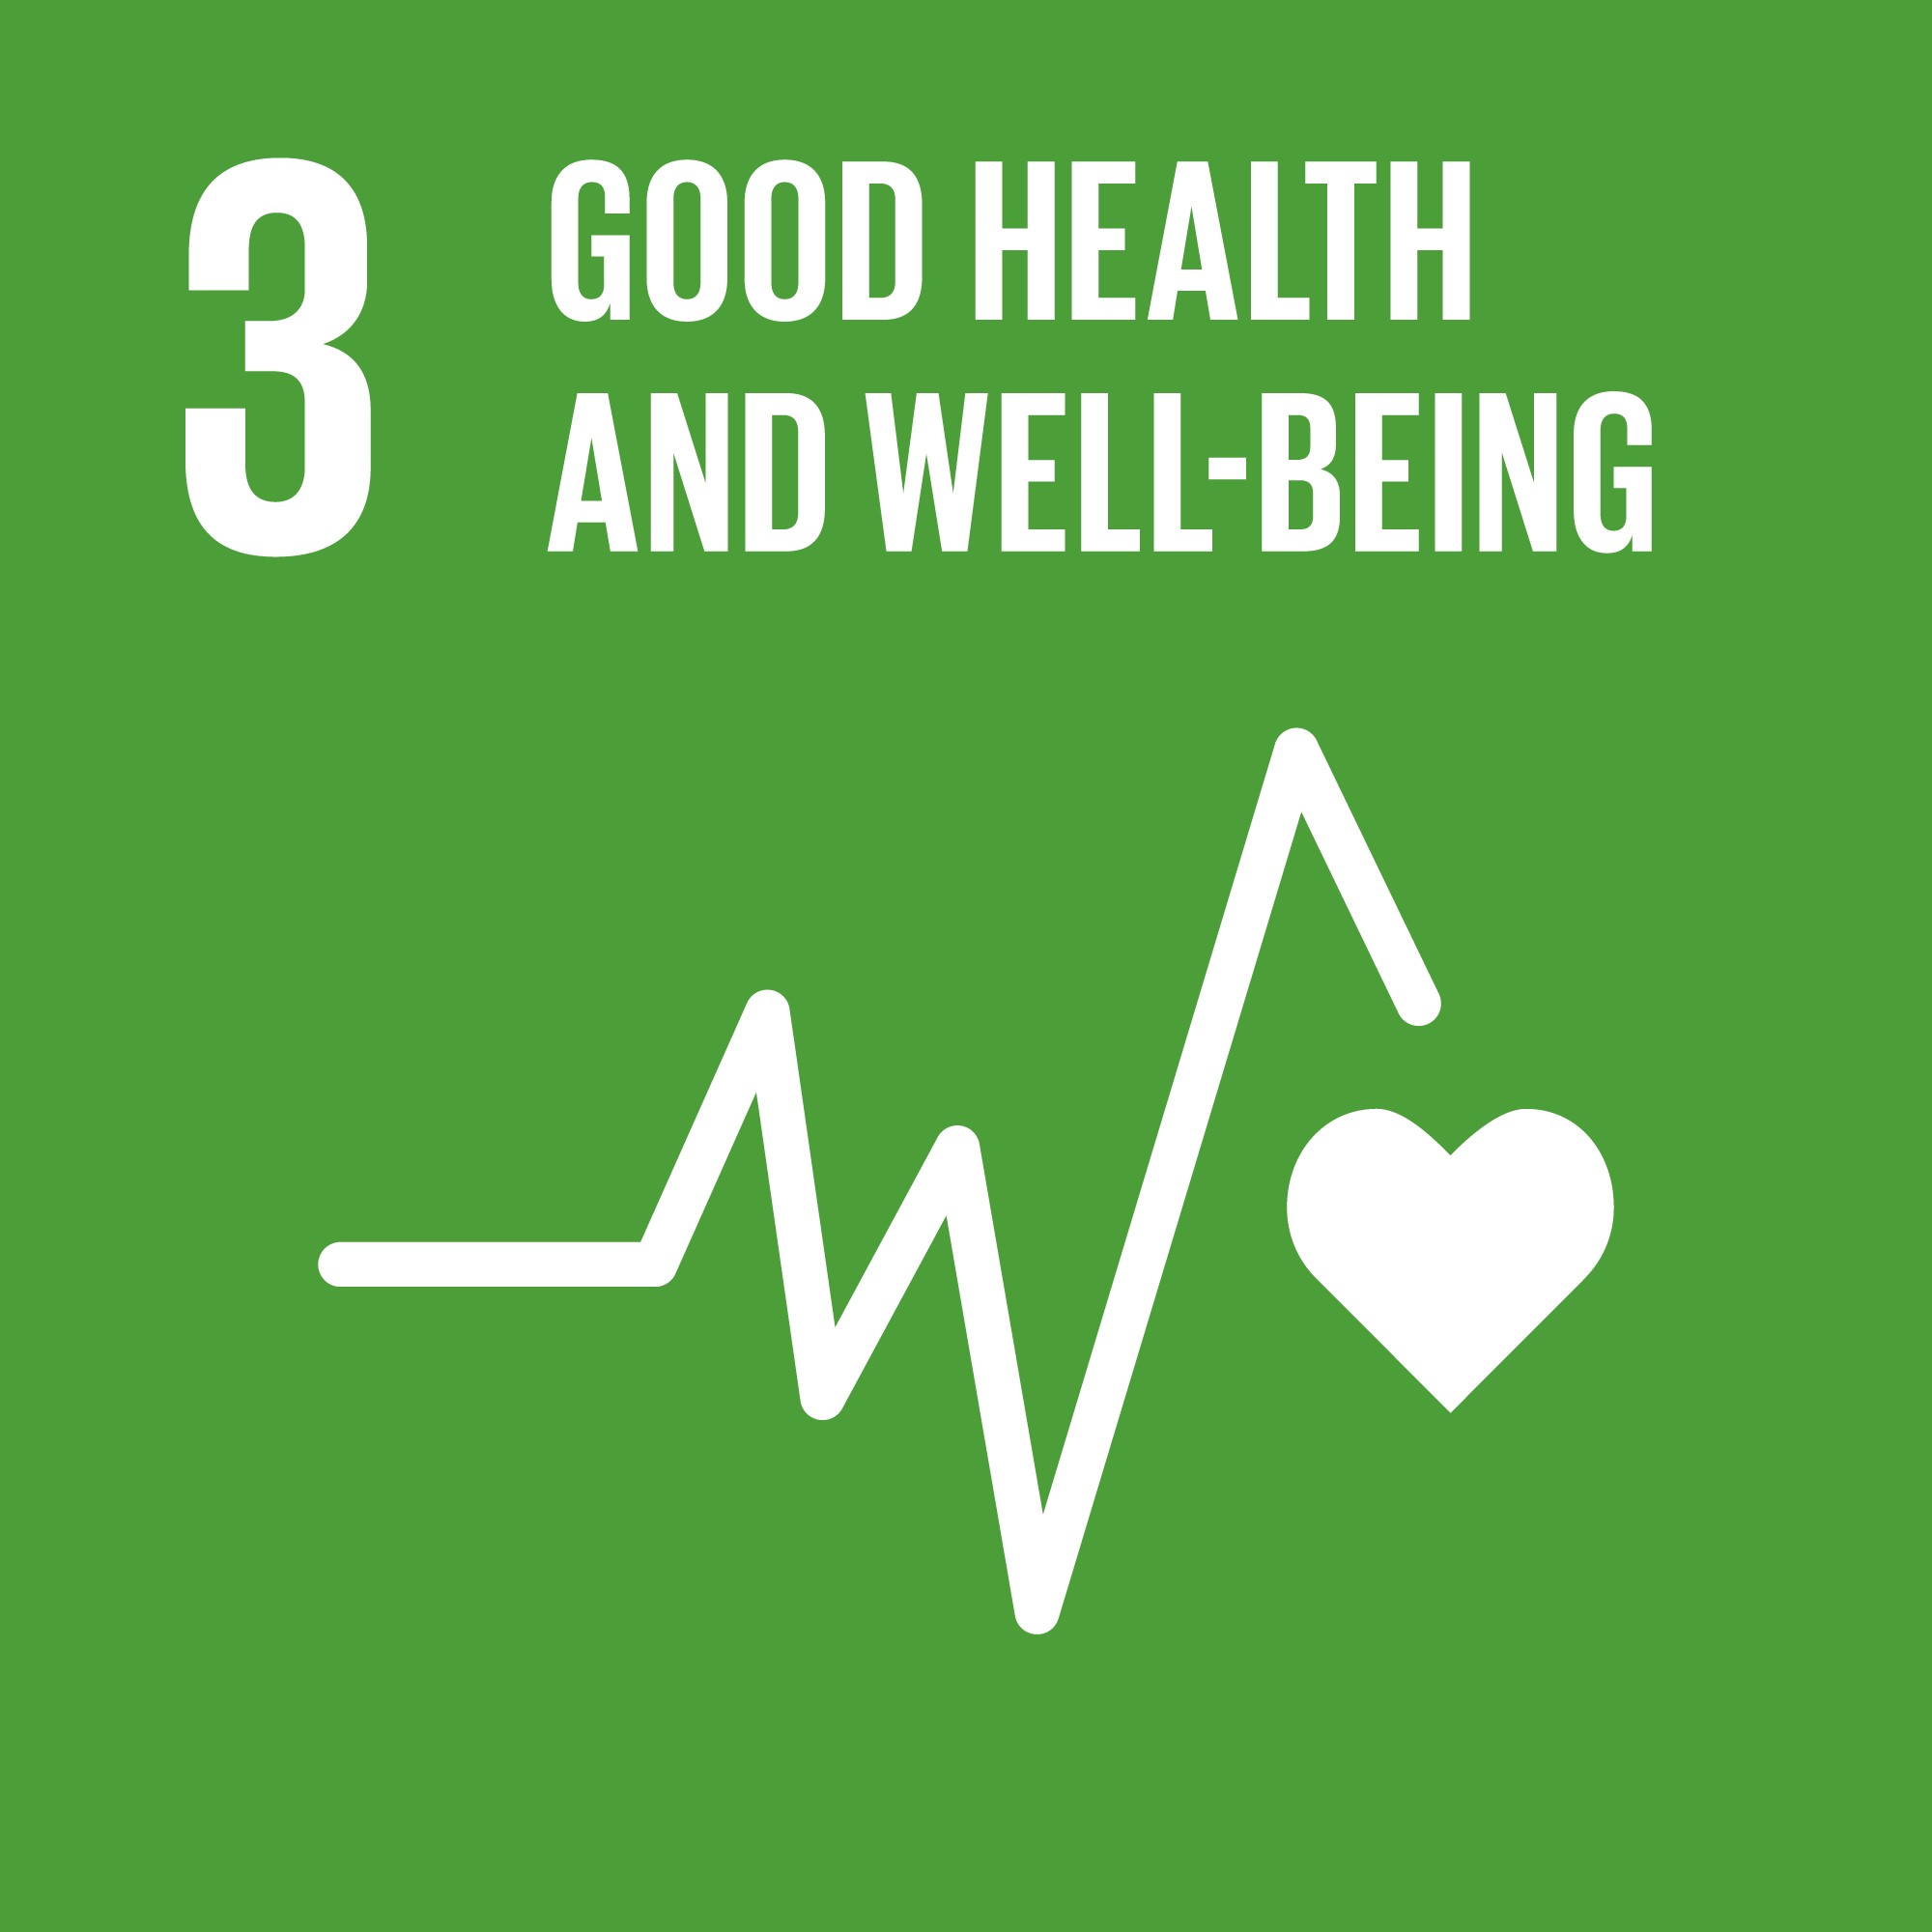 TheGlobalGoals_Icons_Color_Goal_3.jpg